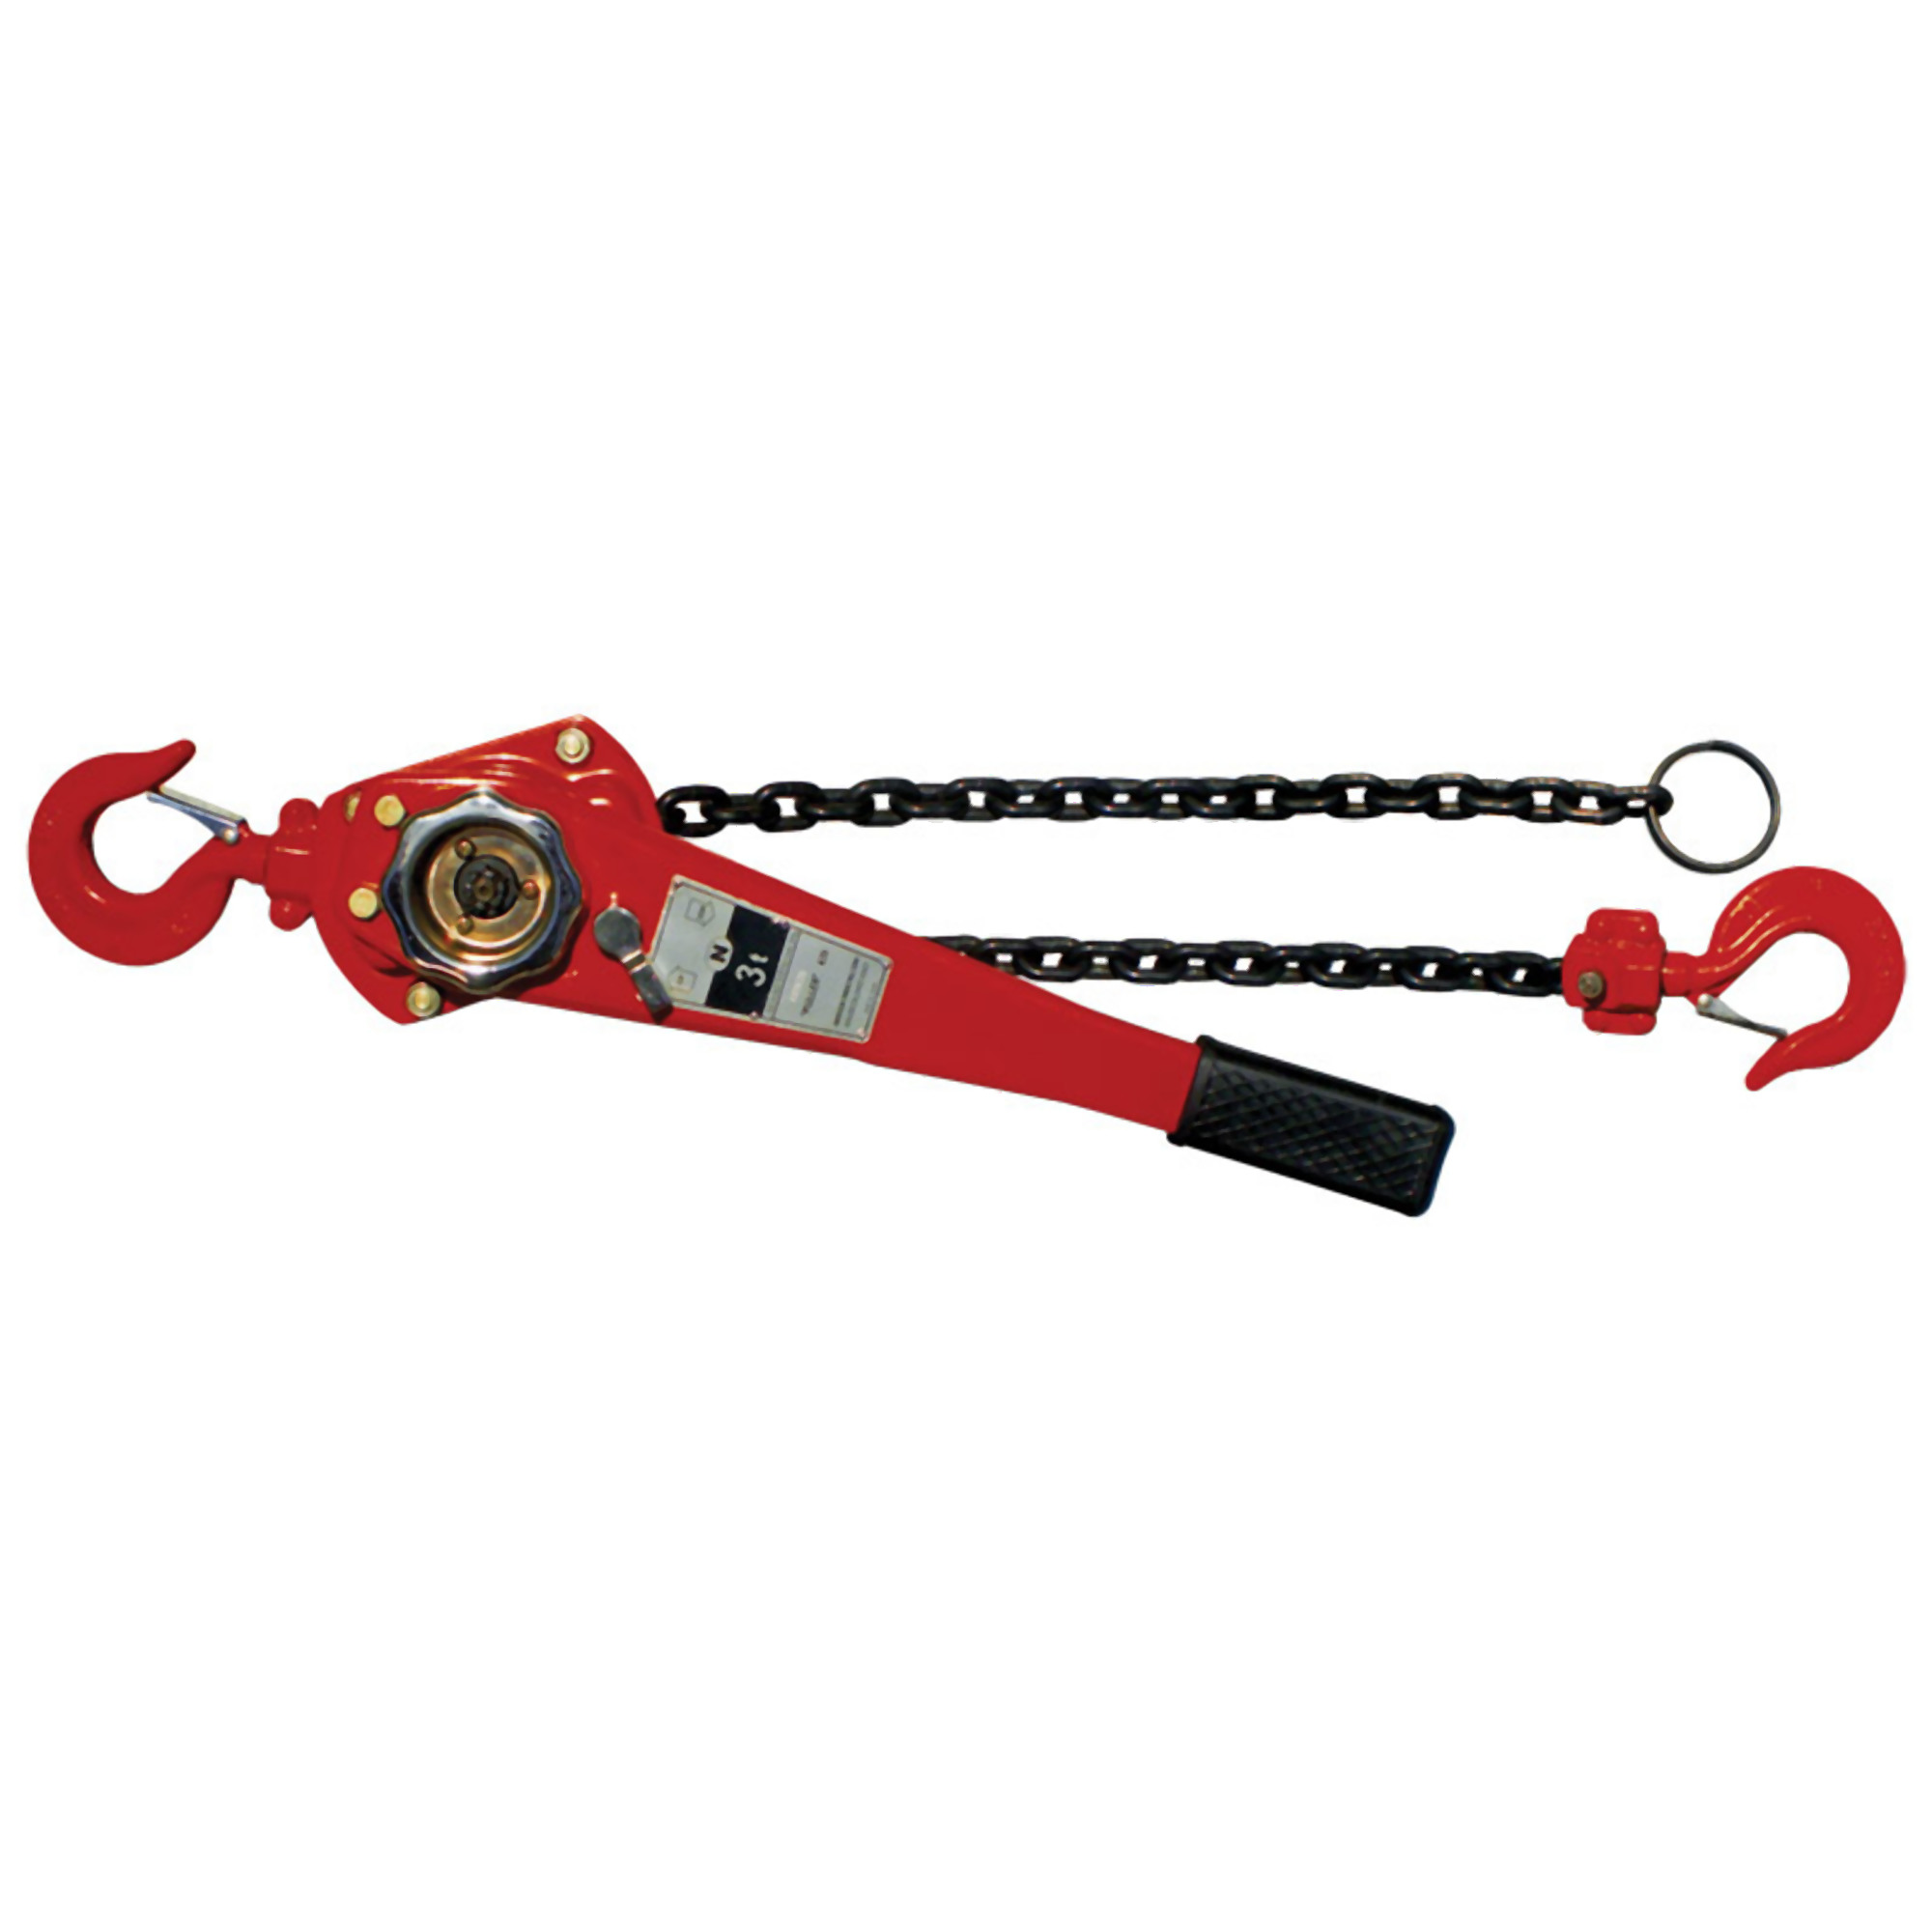 3 ton chain puller w/ 10ft. lift, Power Source Manual Lever, Capacity 6000 lb, Lift Height 10 ft, Model - American Power Pull 635-10